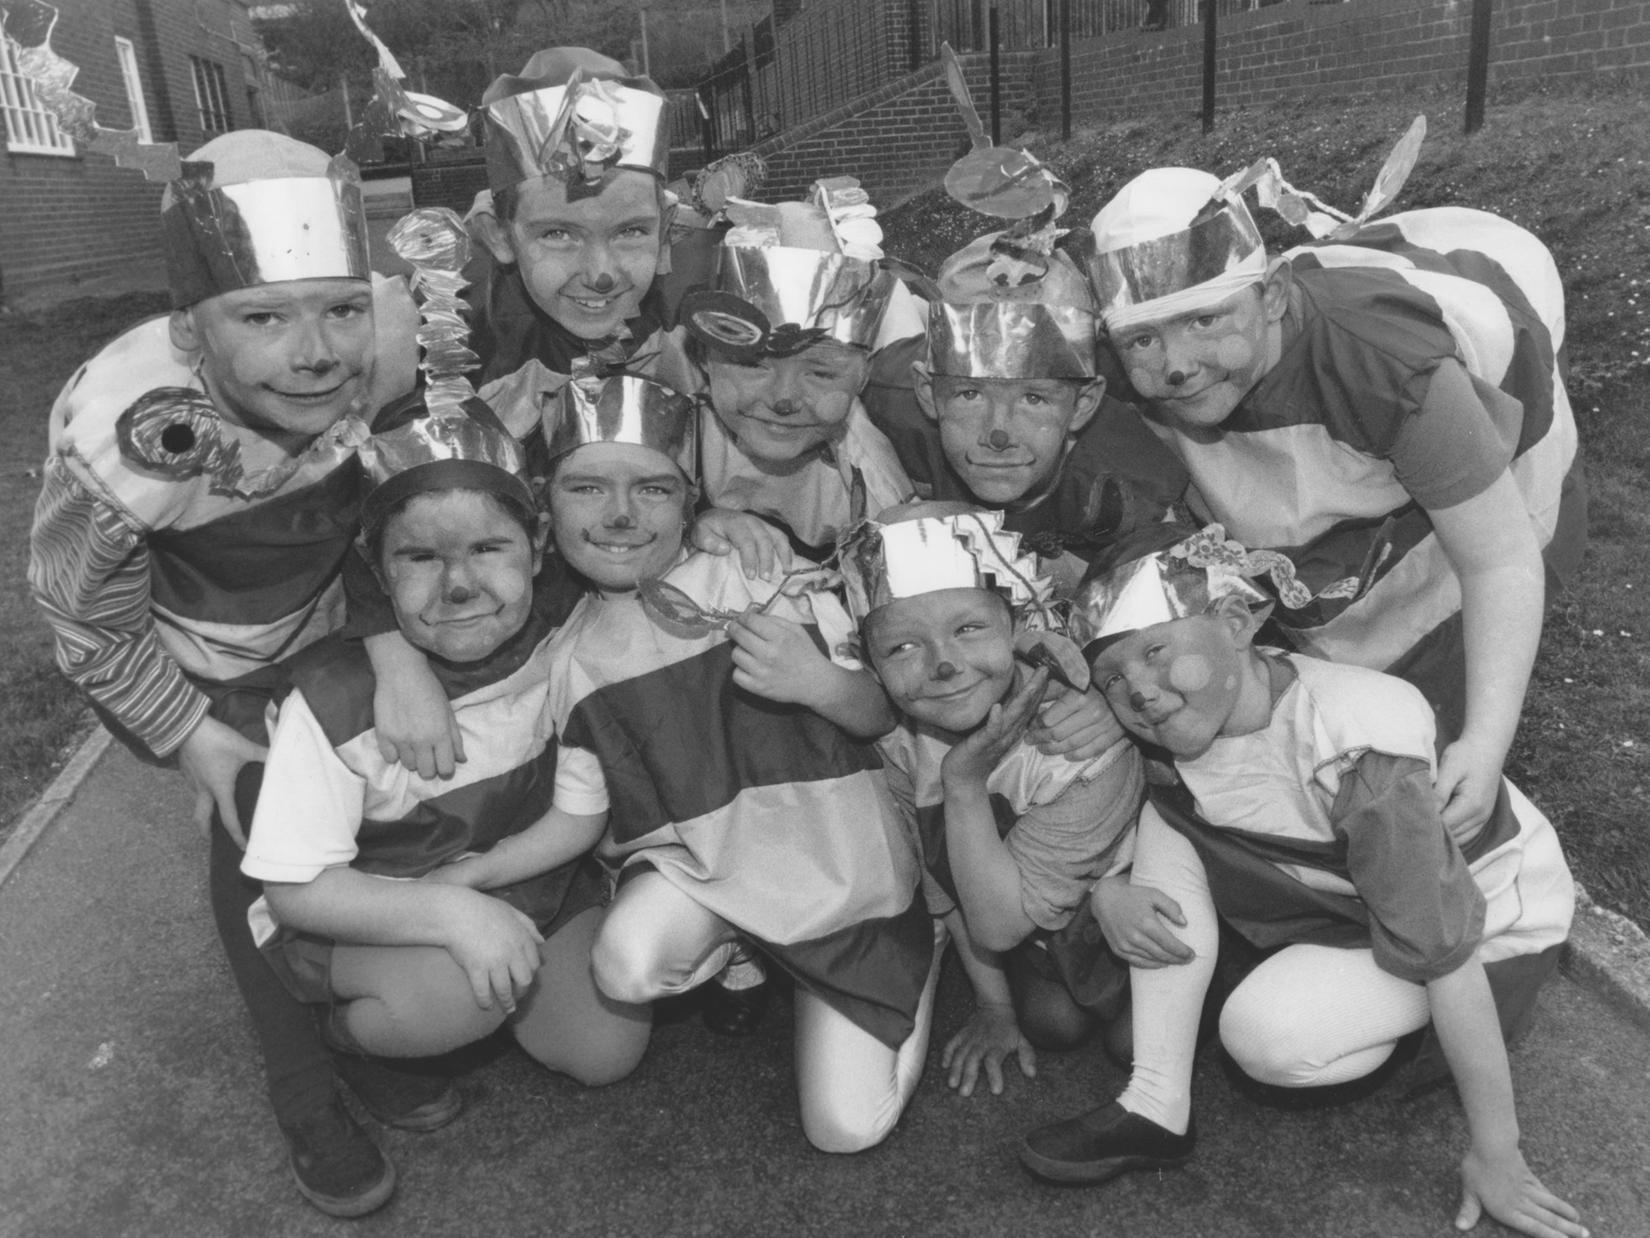 Hinderwell School were about to put on a new production back in April 1997. Pictured just buzzing around are the Bees, left to right, back, Daniel Chaplin, Maija Brown, Gareth Williams, Craig Finch, and George Prew; front, Sangita Emad, Elizabeth Birley, Andrew Sygrove, and Sophie Hill.